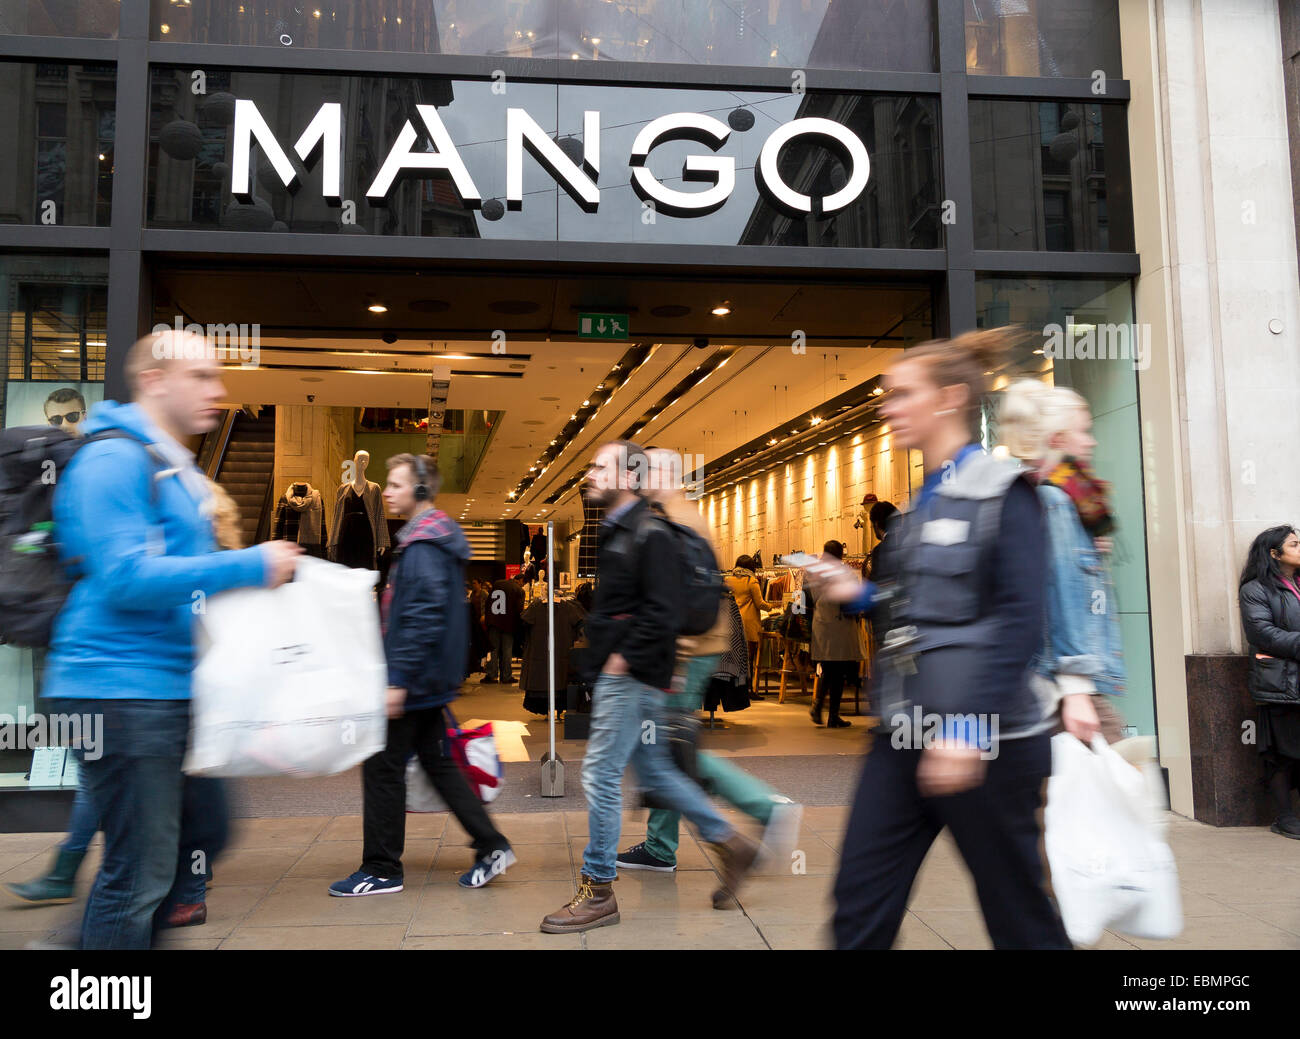 A branch of the fashion chain Mango in Oxford Street, London Stock Photo -  Alamy